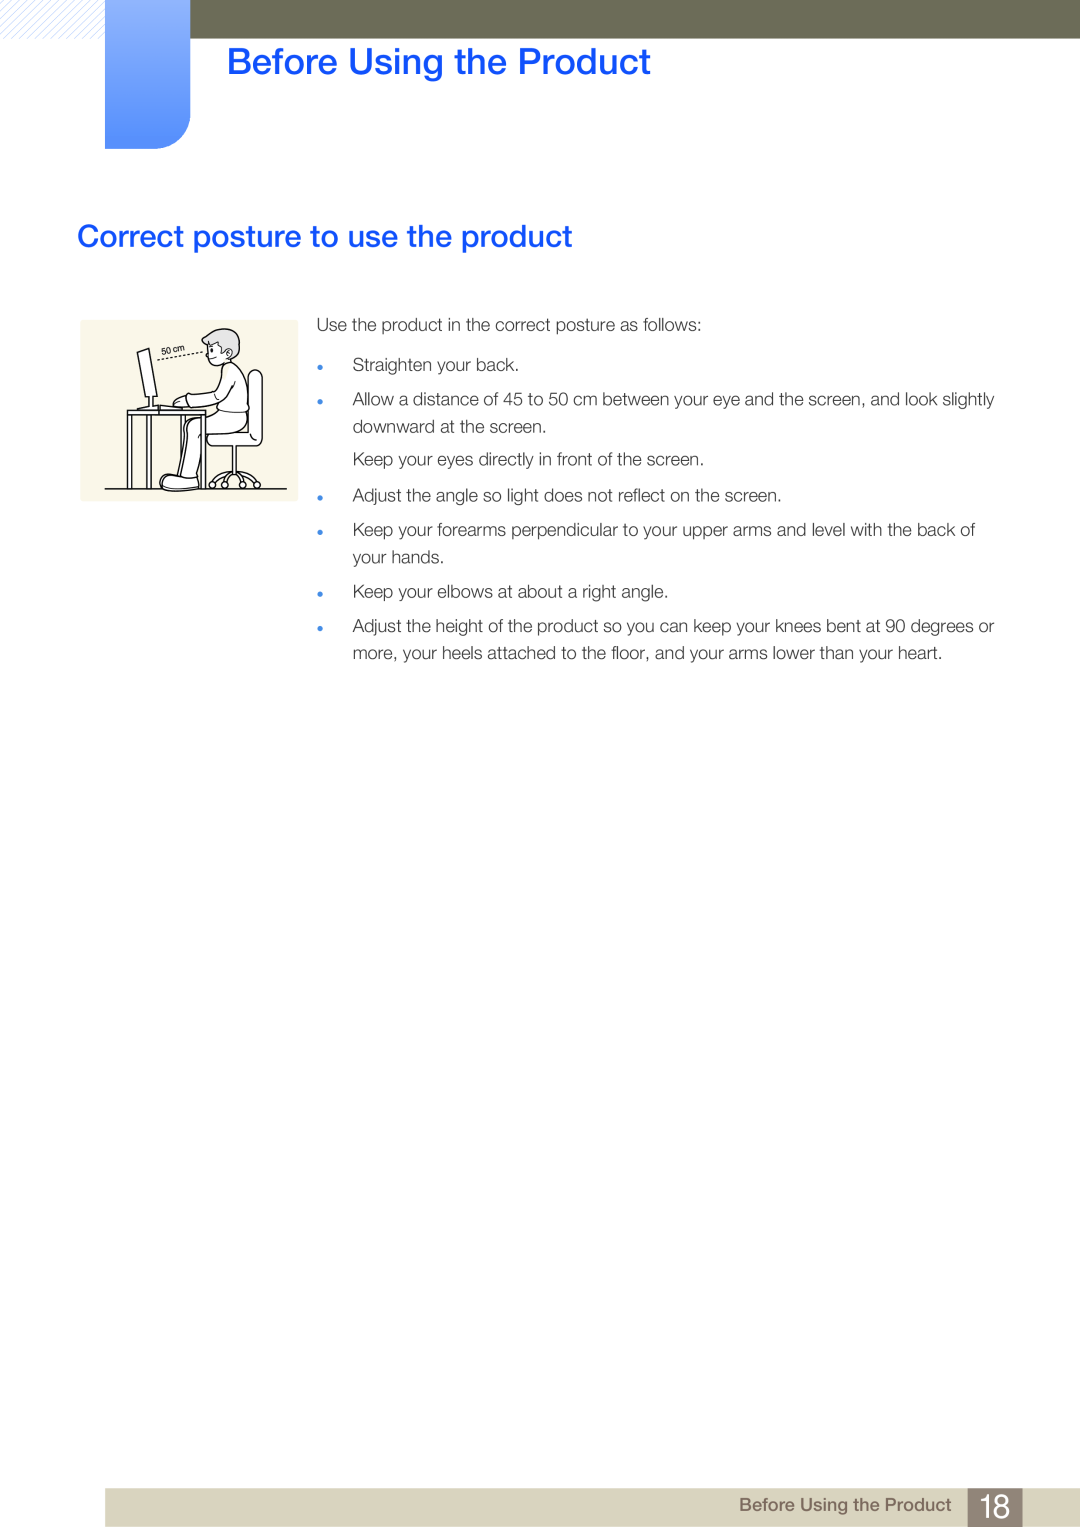 Samsung LS27E45KBH/EN, LS23E65UDC/EN, LS24E45UDLC/EN manual Correct posture to use the product, Before Using the Product 